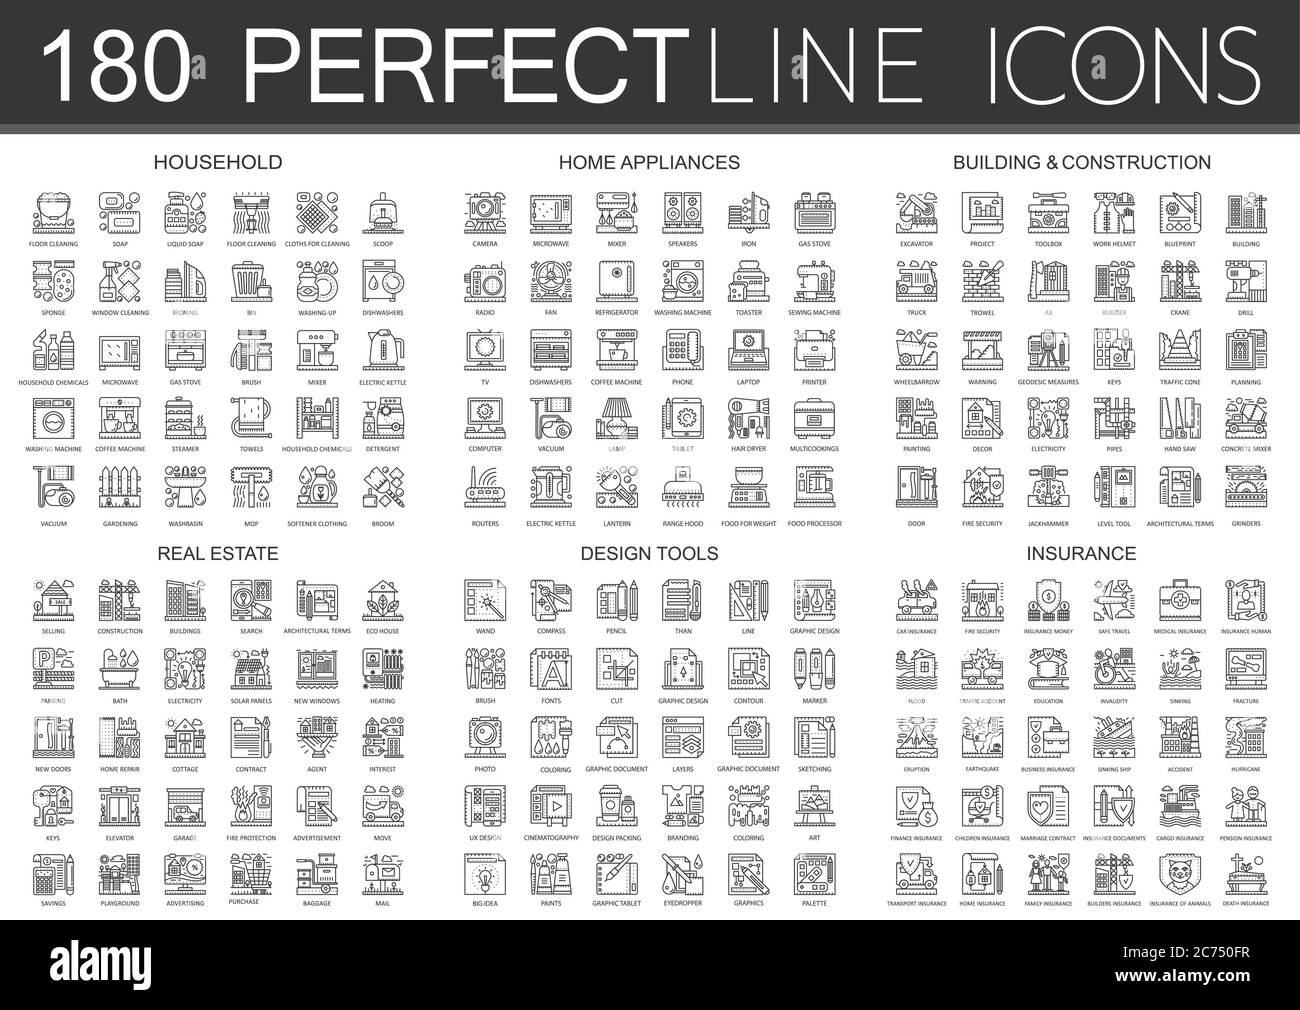 180 outline mini concept infographic symbol icons of household, home appliances, building construction, real estate, design tools, insurance isolated. Stock Vector